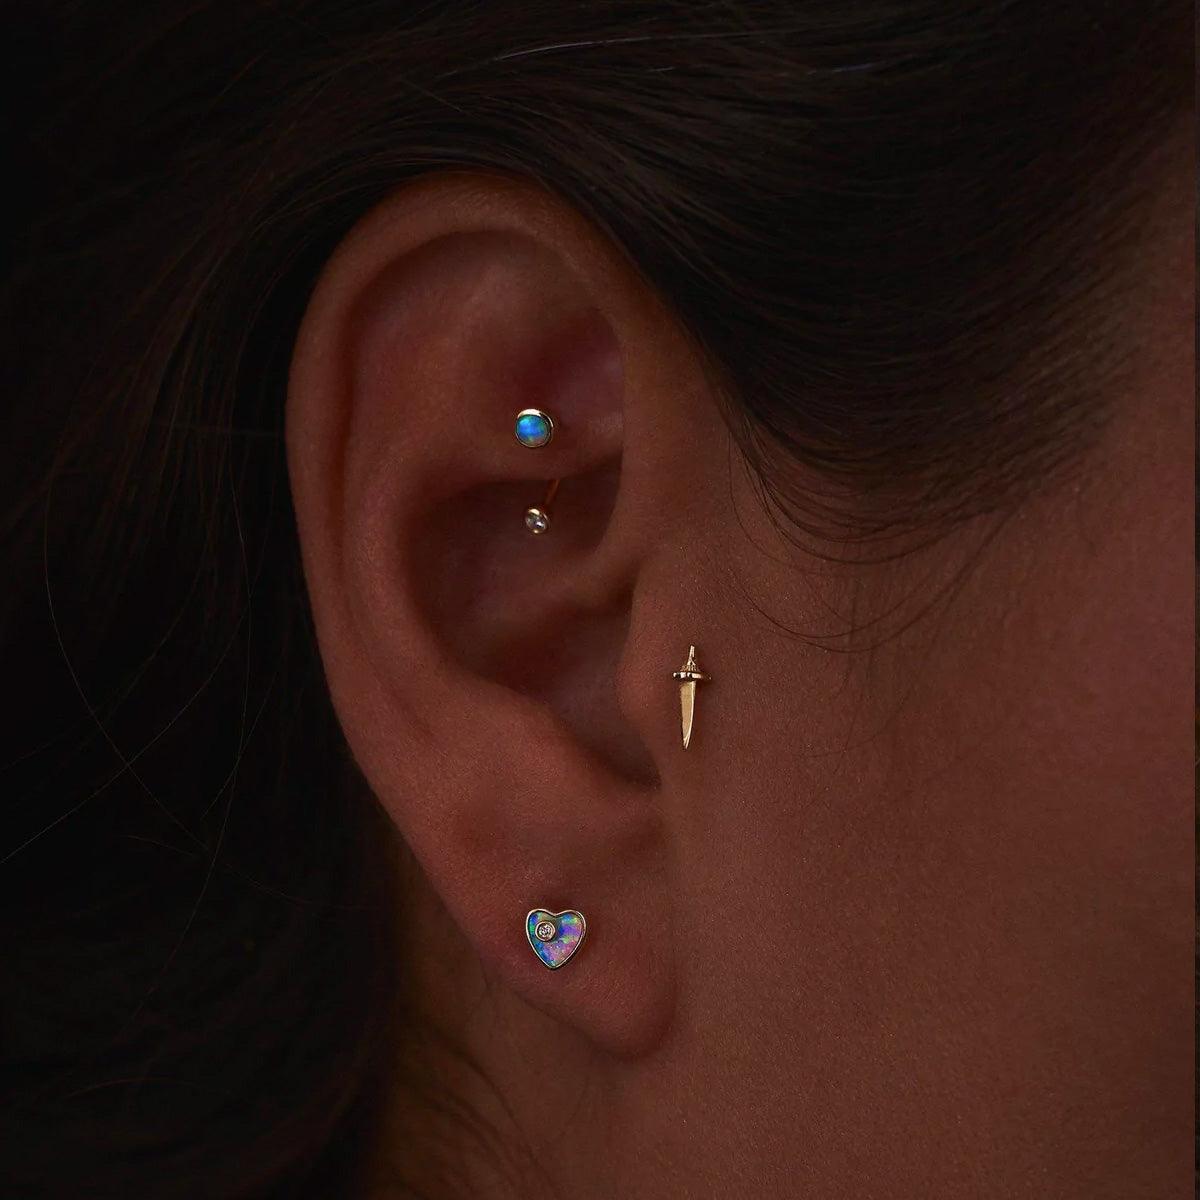 Rook Piercing: Everything You Need to Know - At Present